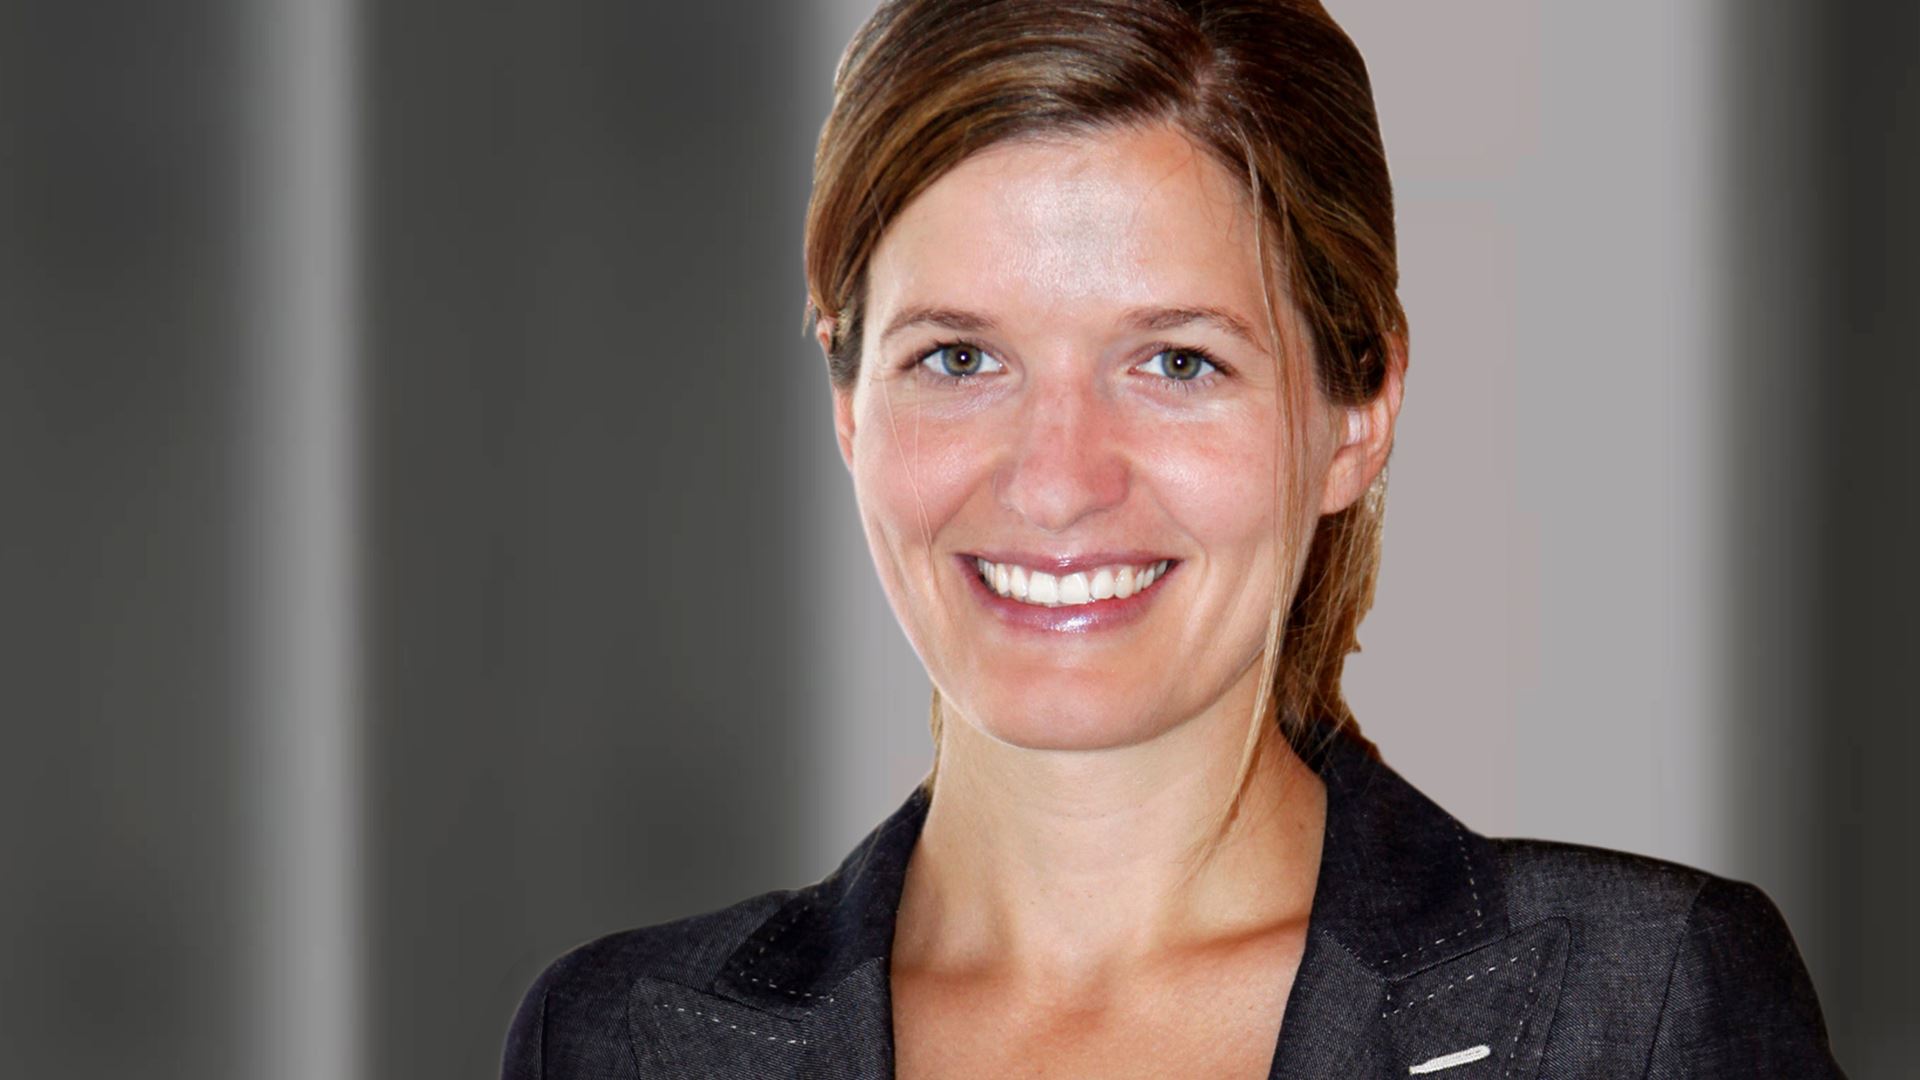 Free2move eSolutions Names Mathilde Lheureux as new CEO